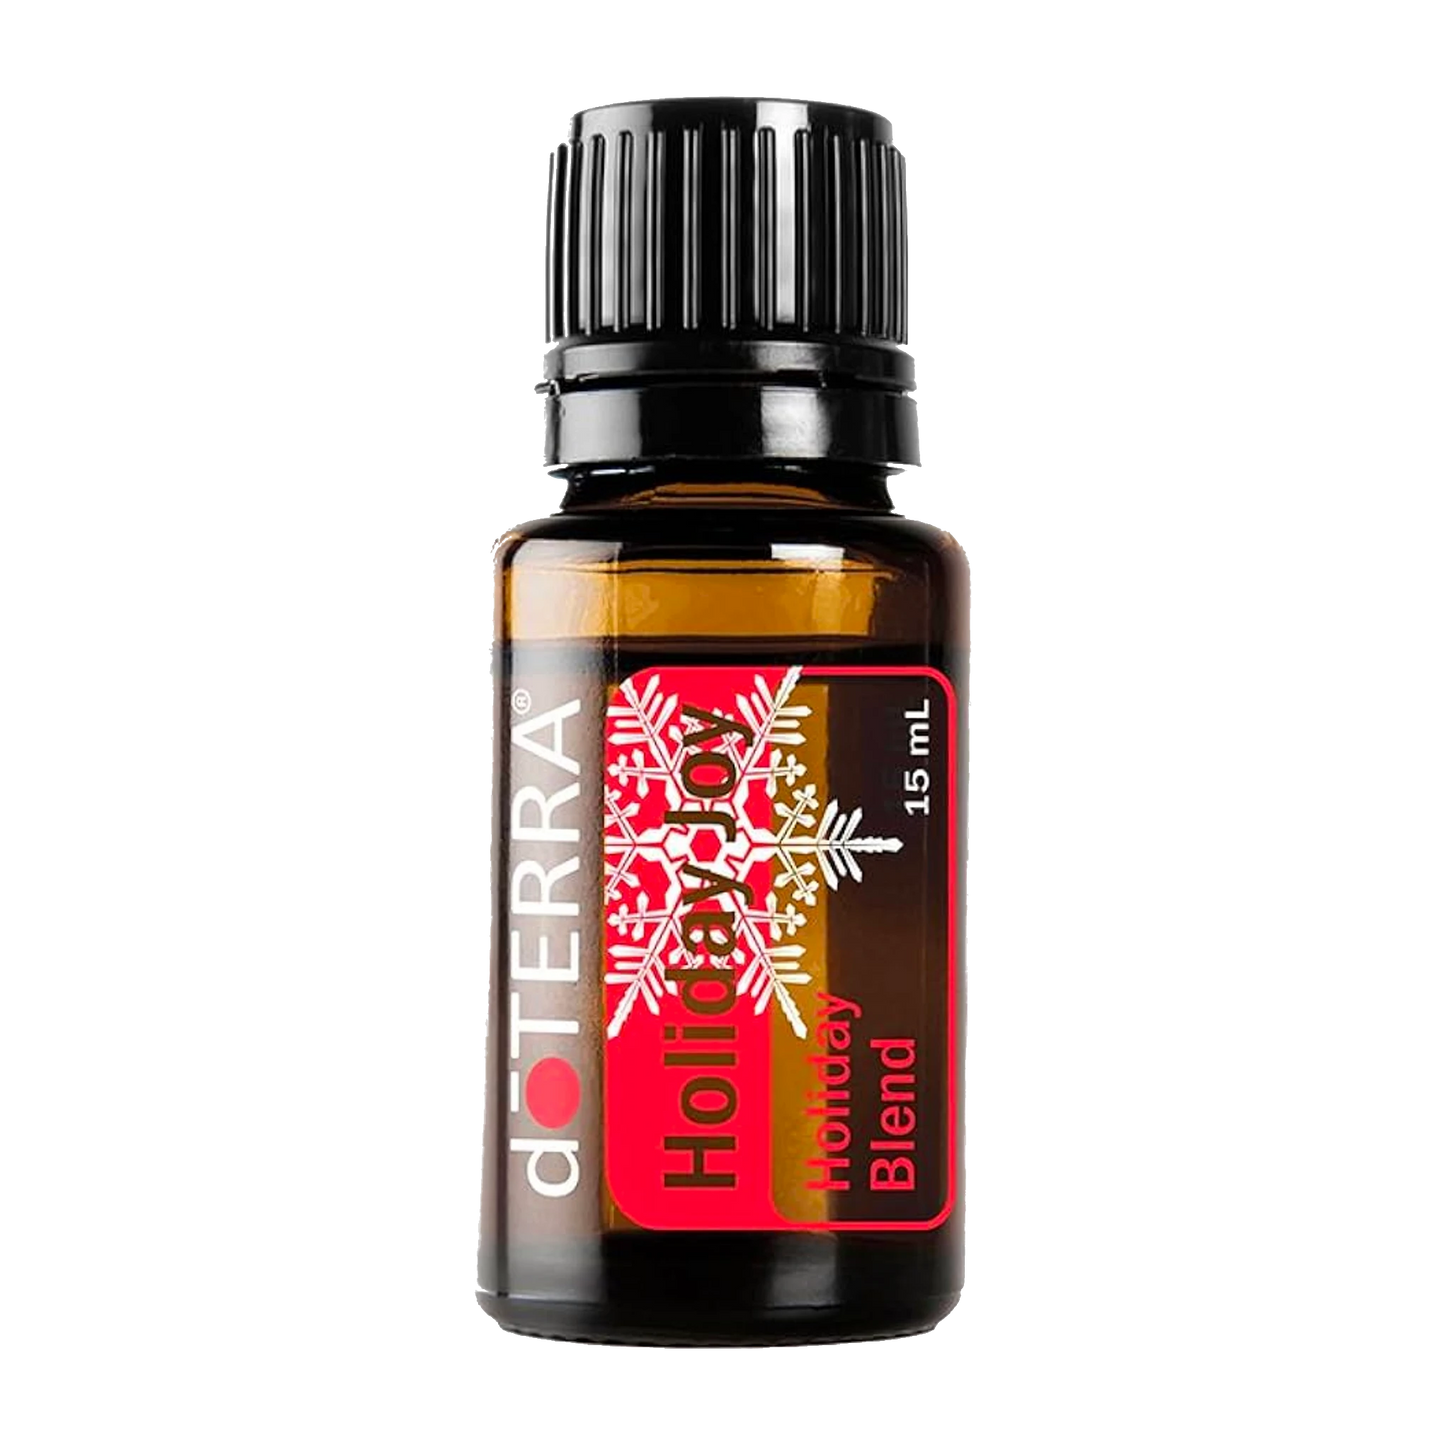 Holiday Joy Holiday Essential Oil Blend 15ml